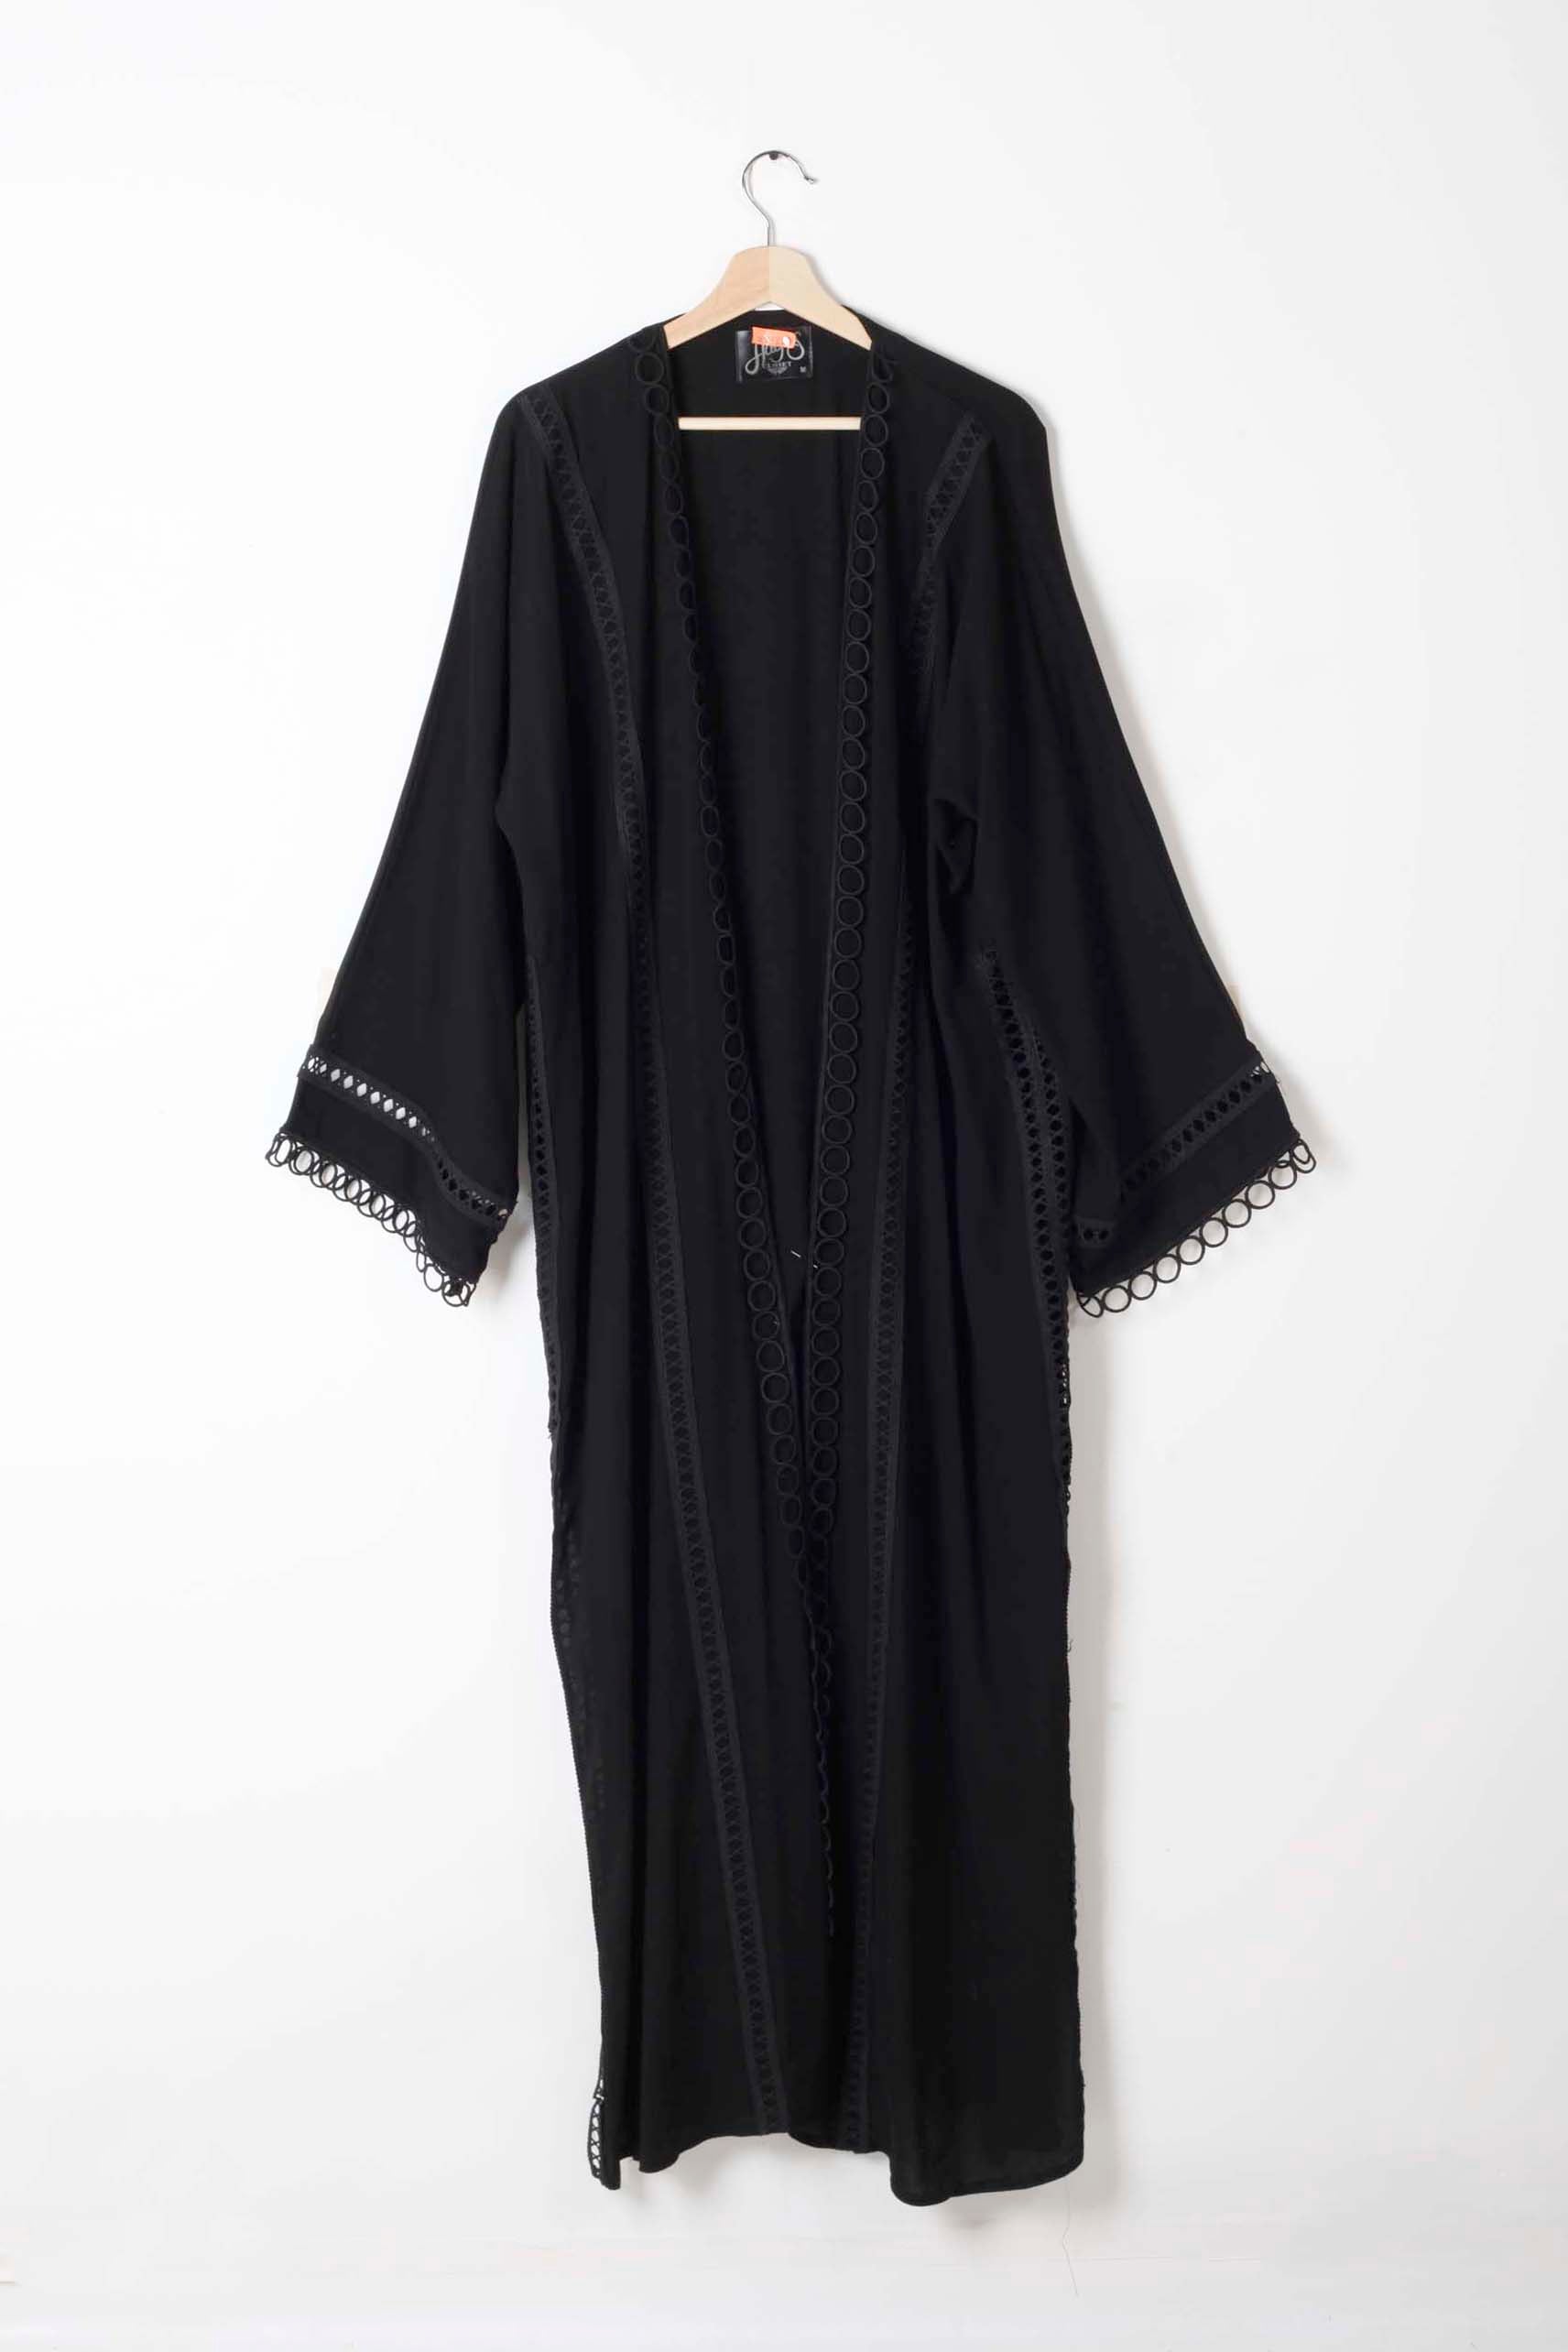 Black Abaya with Embroidery Circle Detail